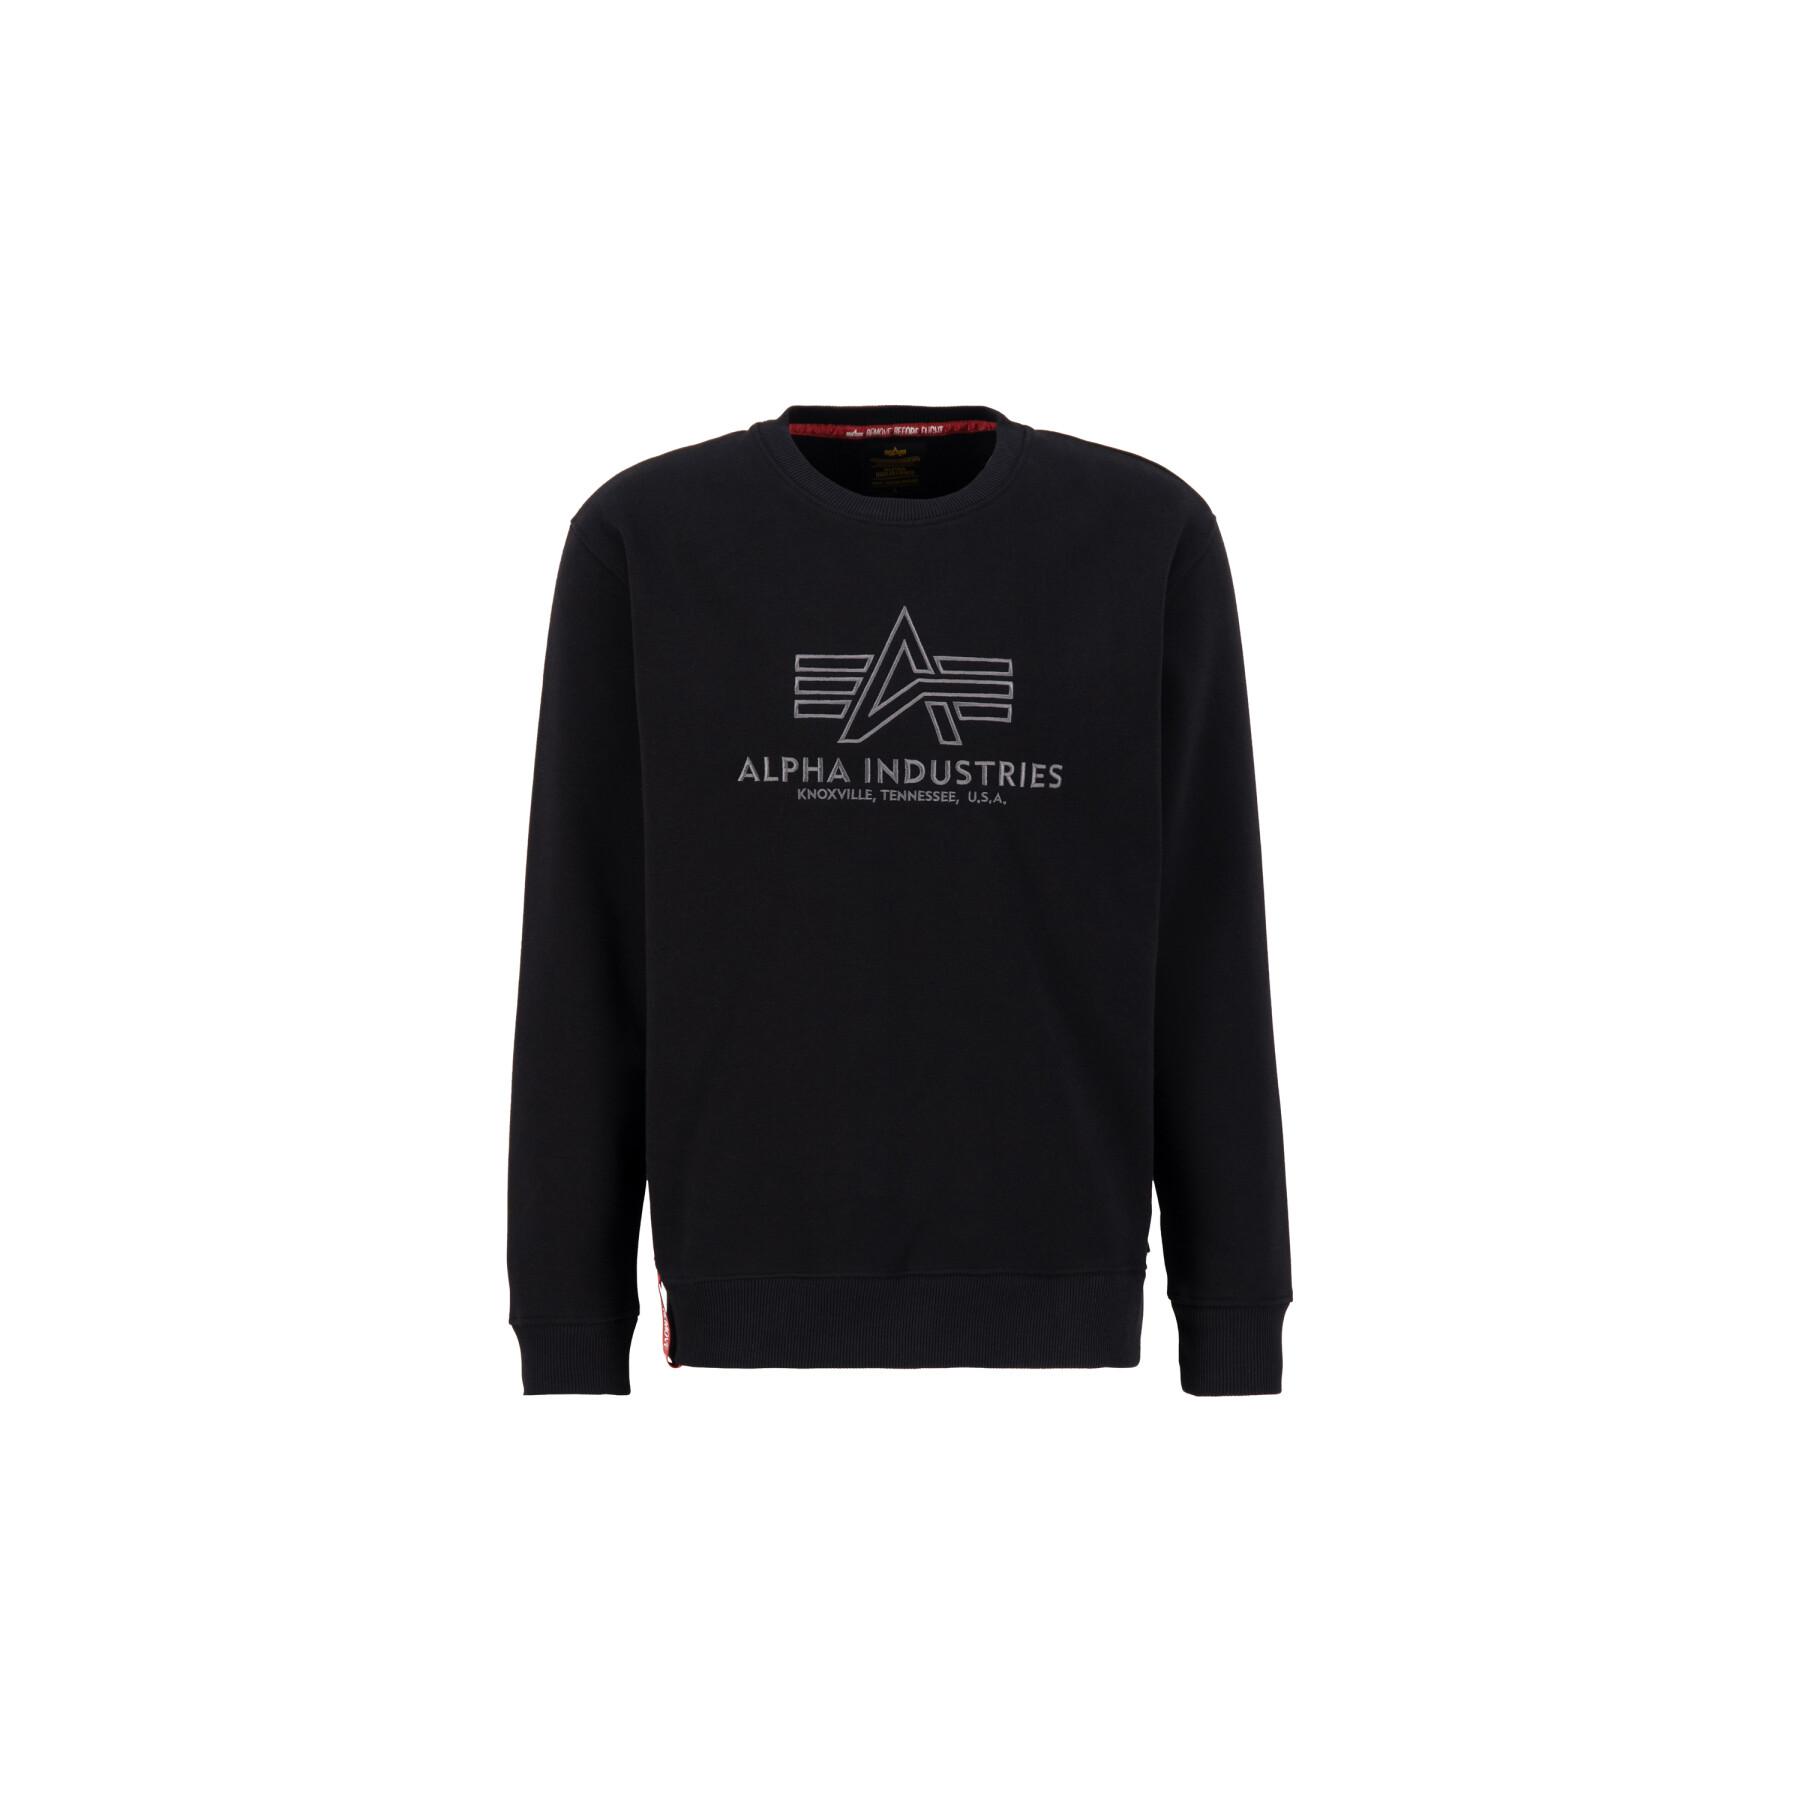 Jackets Industries Alpha - Basic - Sweater Men - Clothing Embroidery